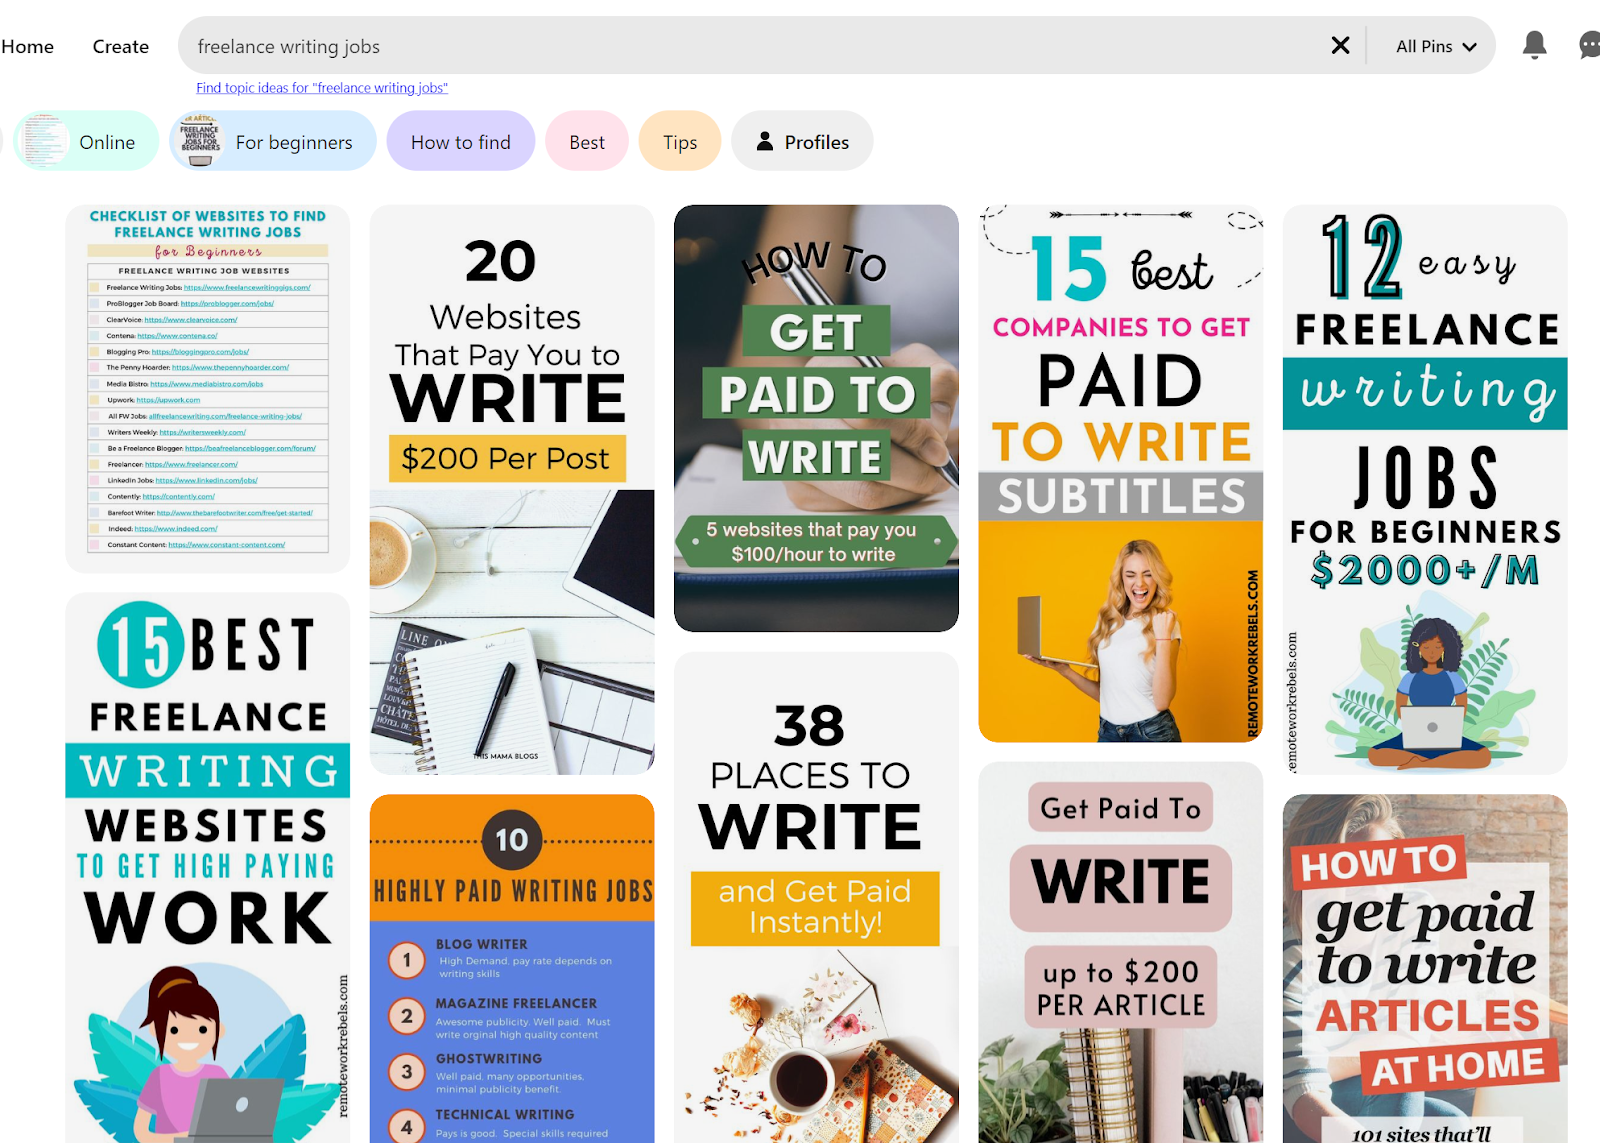 Pinterest search results for freelance writing jobs keywords